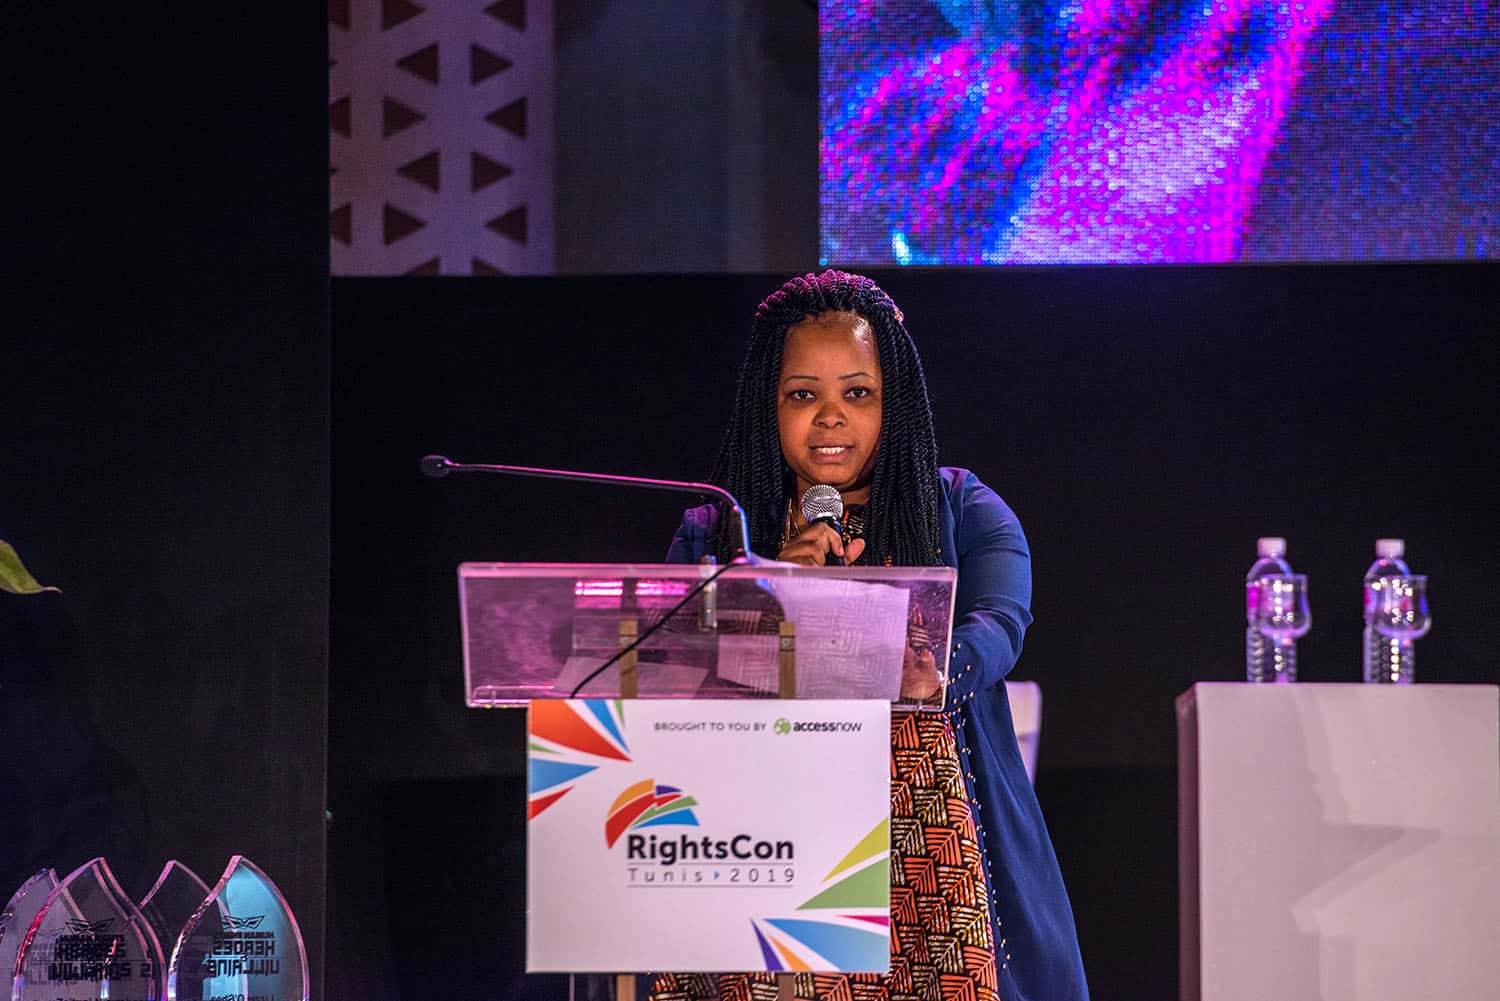 A woman speaking at RightsCon Tunis 2019.